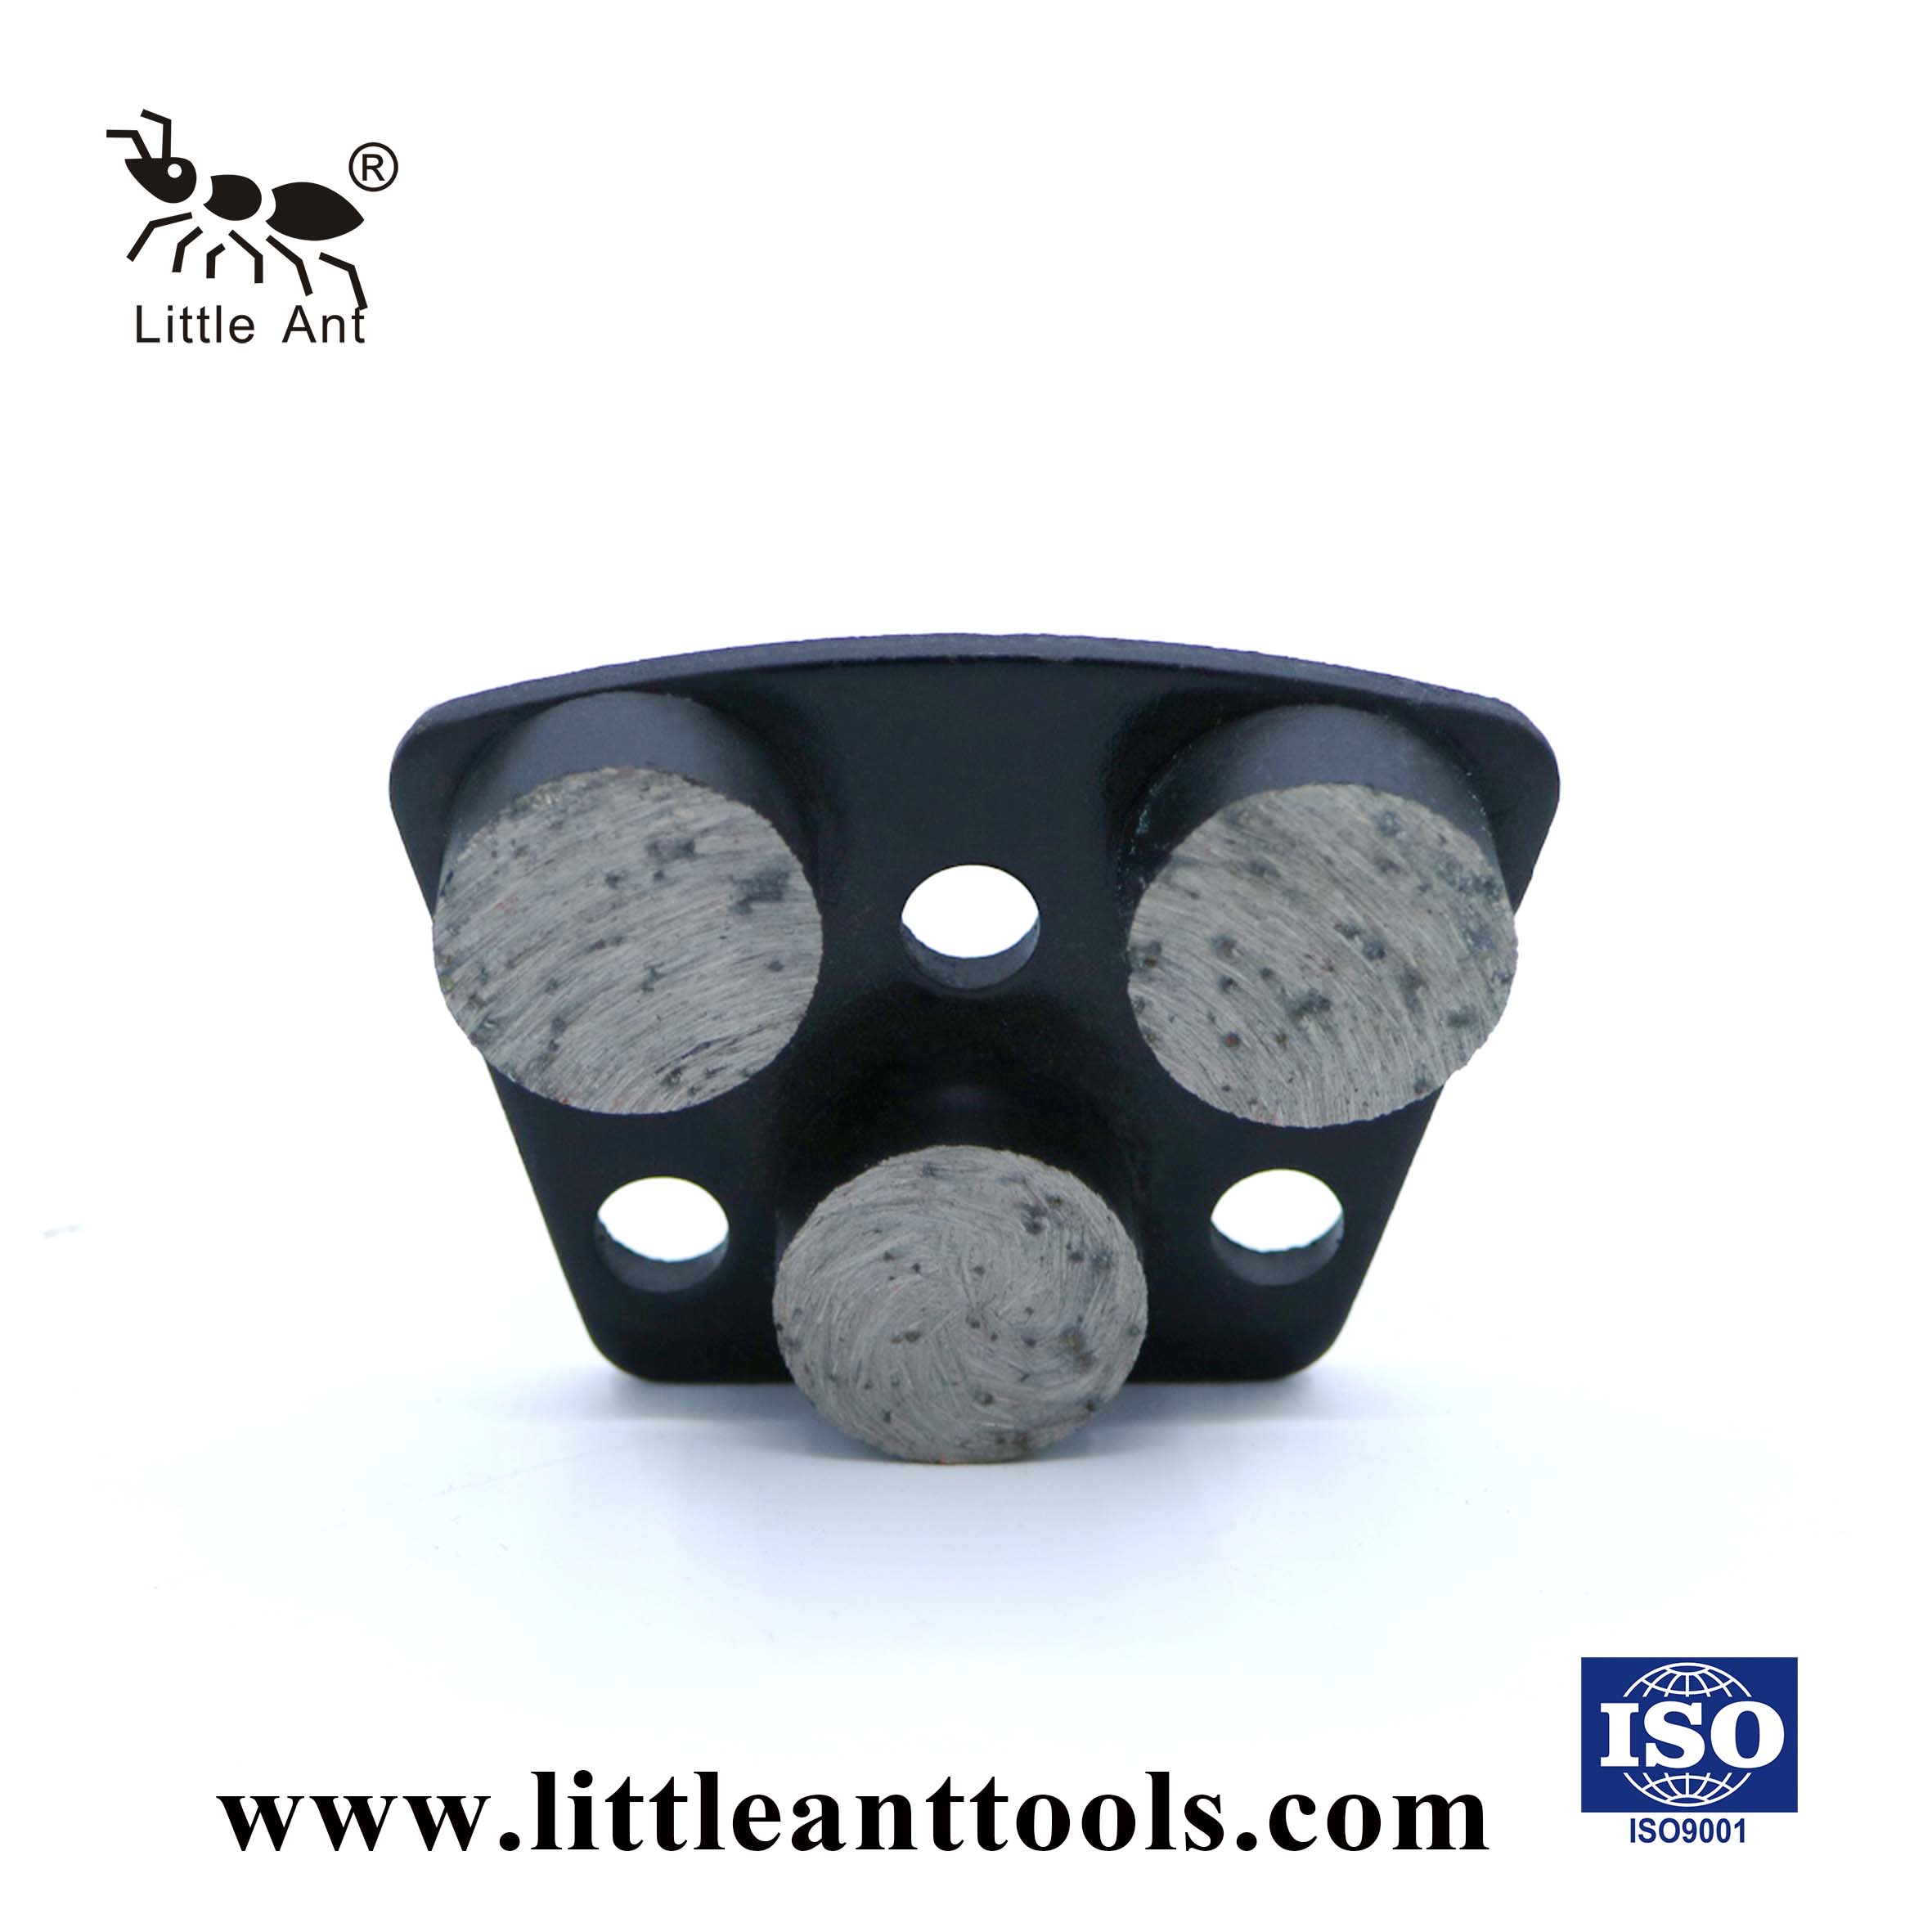 LITTLE ANT Trapezoid Metal Diamond Grinding Plate for Concrete Floor Round Segments Dry Or Wet Use Coarse Fine